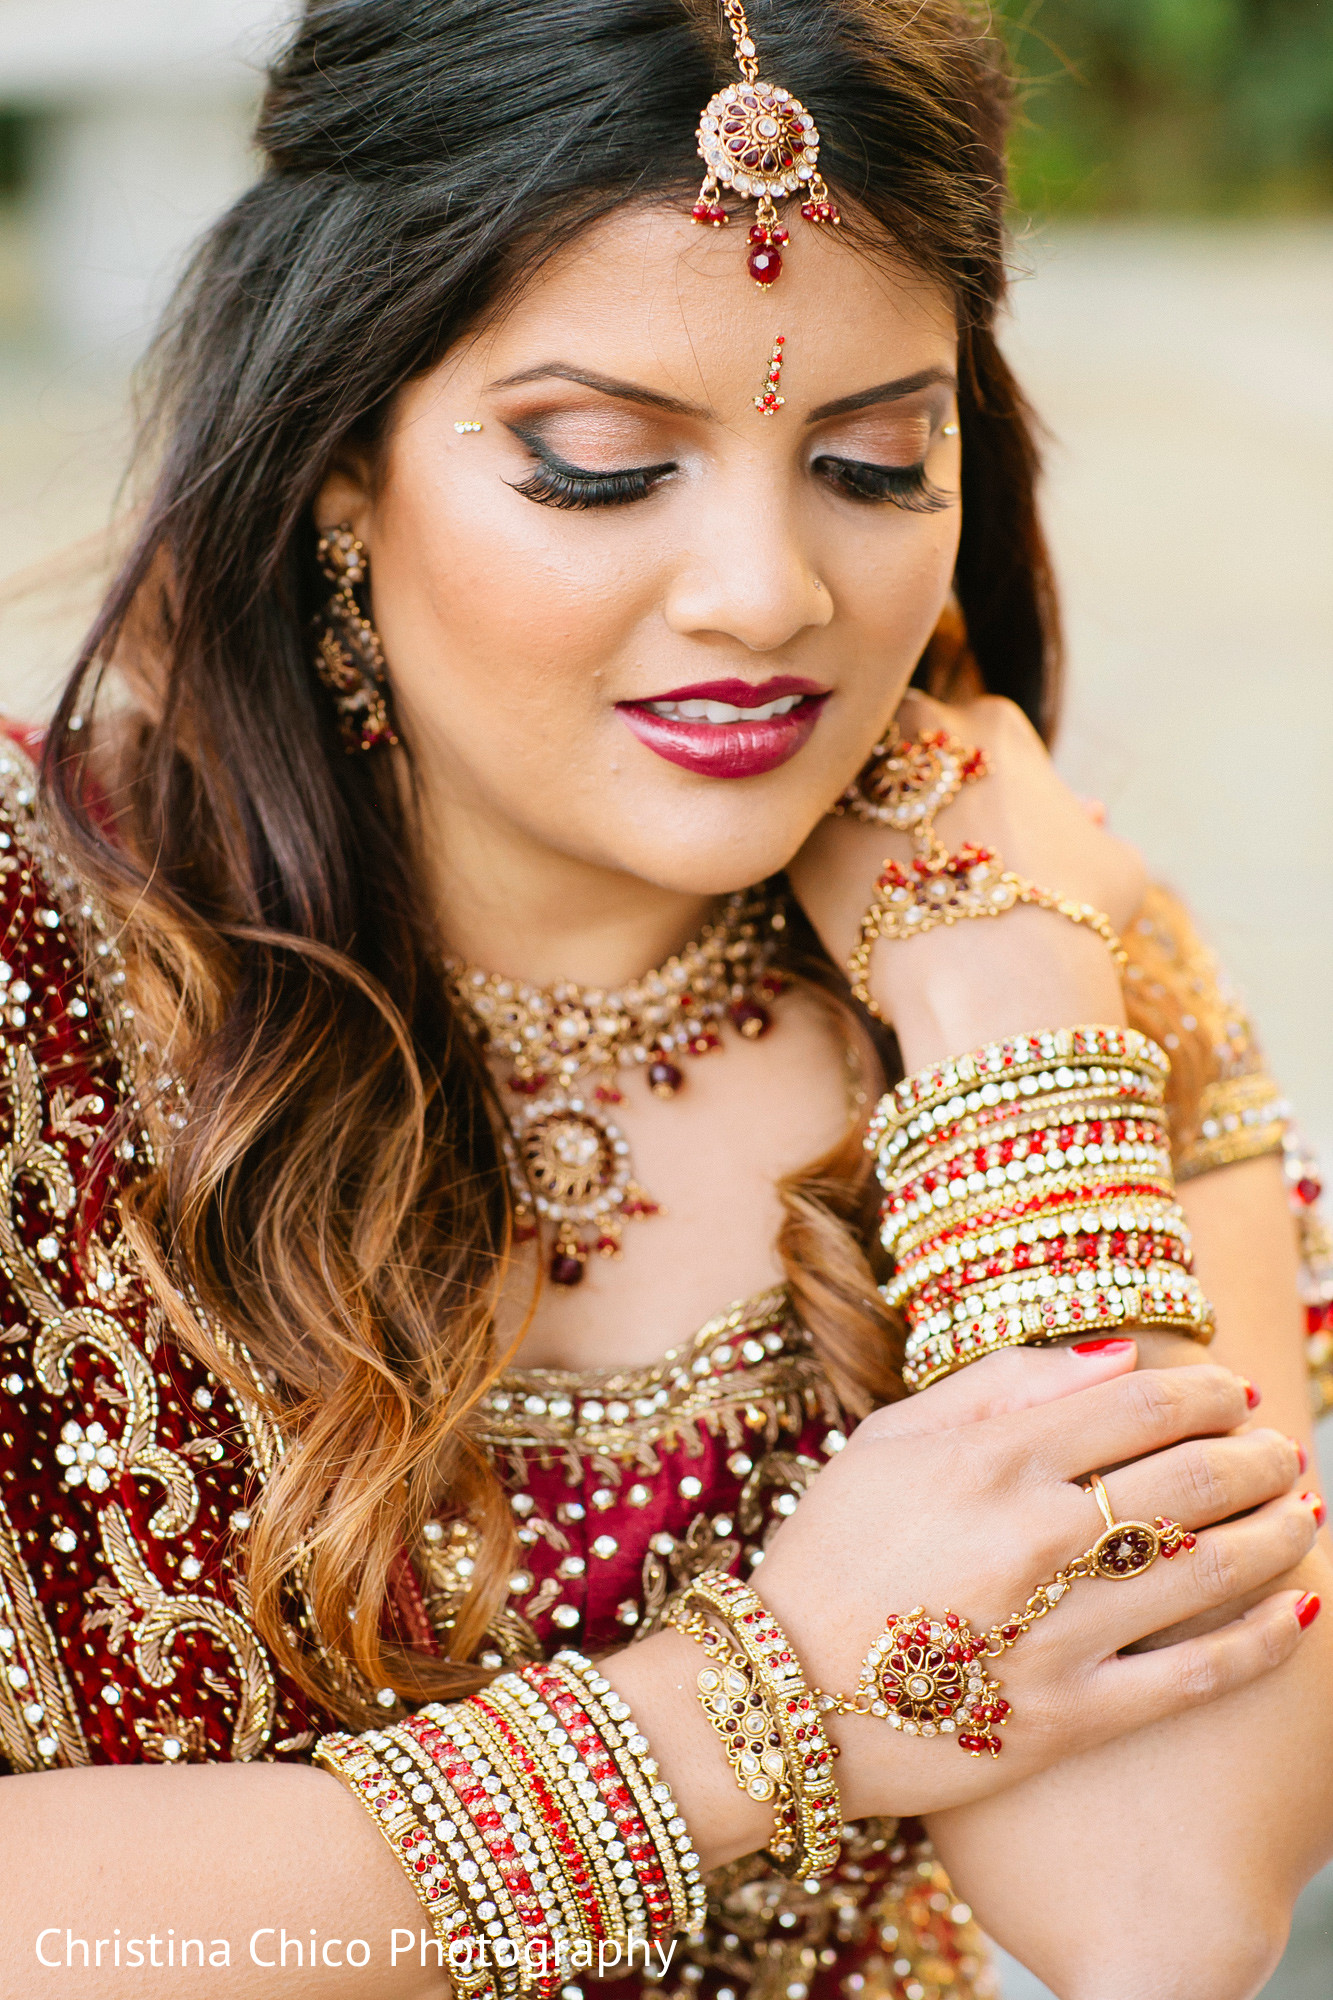 82,761 Traditional Indian Bride Images, Stock Photos, 3D objects, & Vectors  | Shutterstock